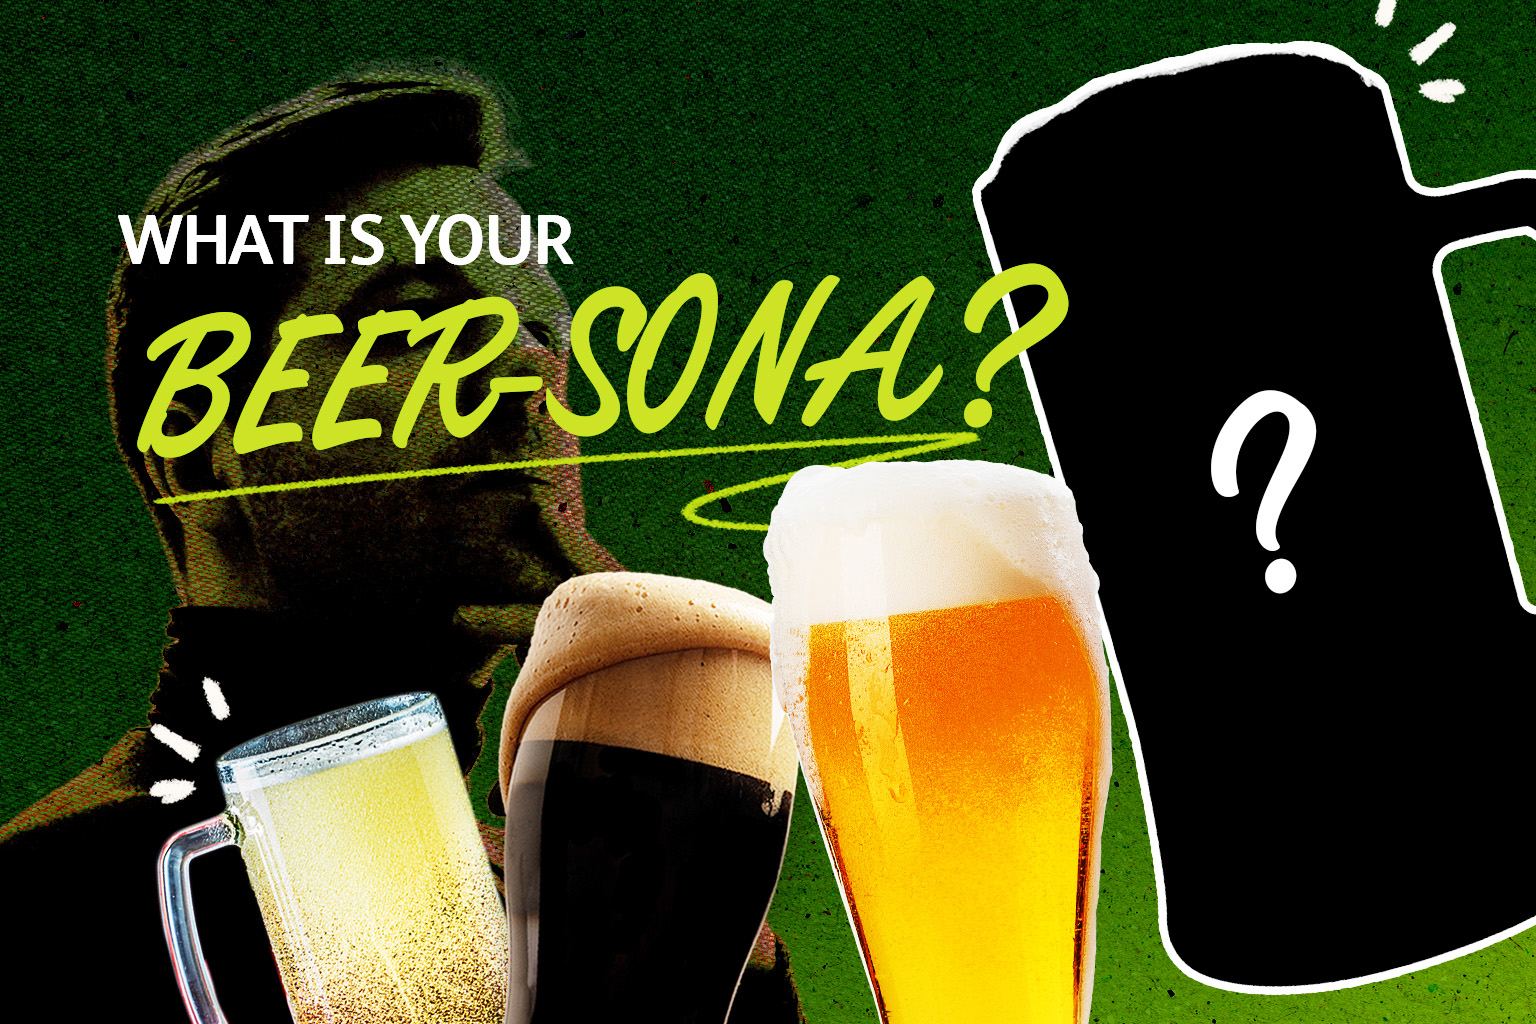 Take this quiz and we’ll tell you what type of beer you should try!